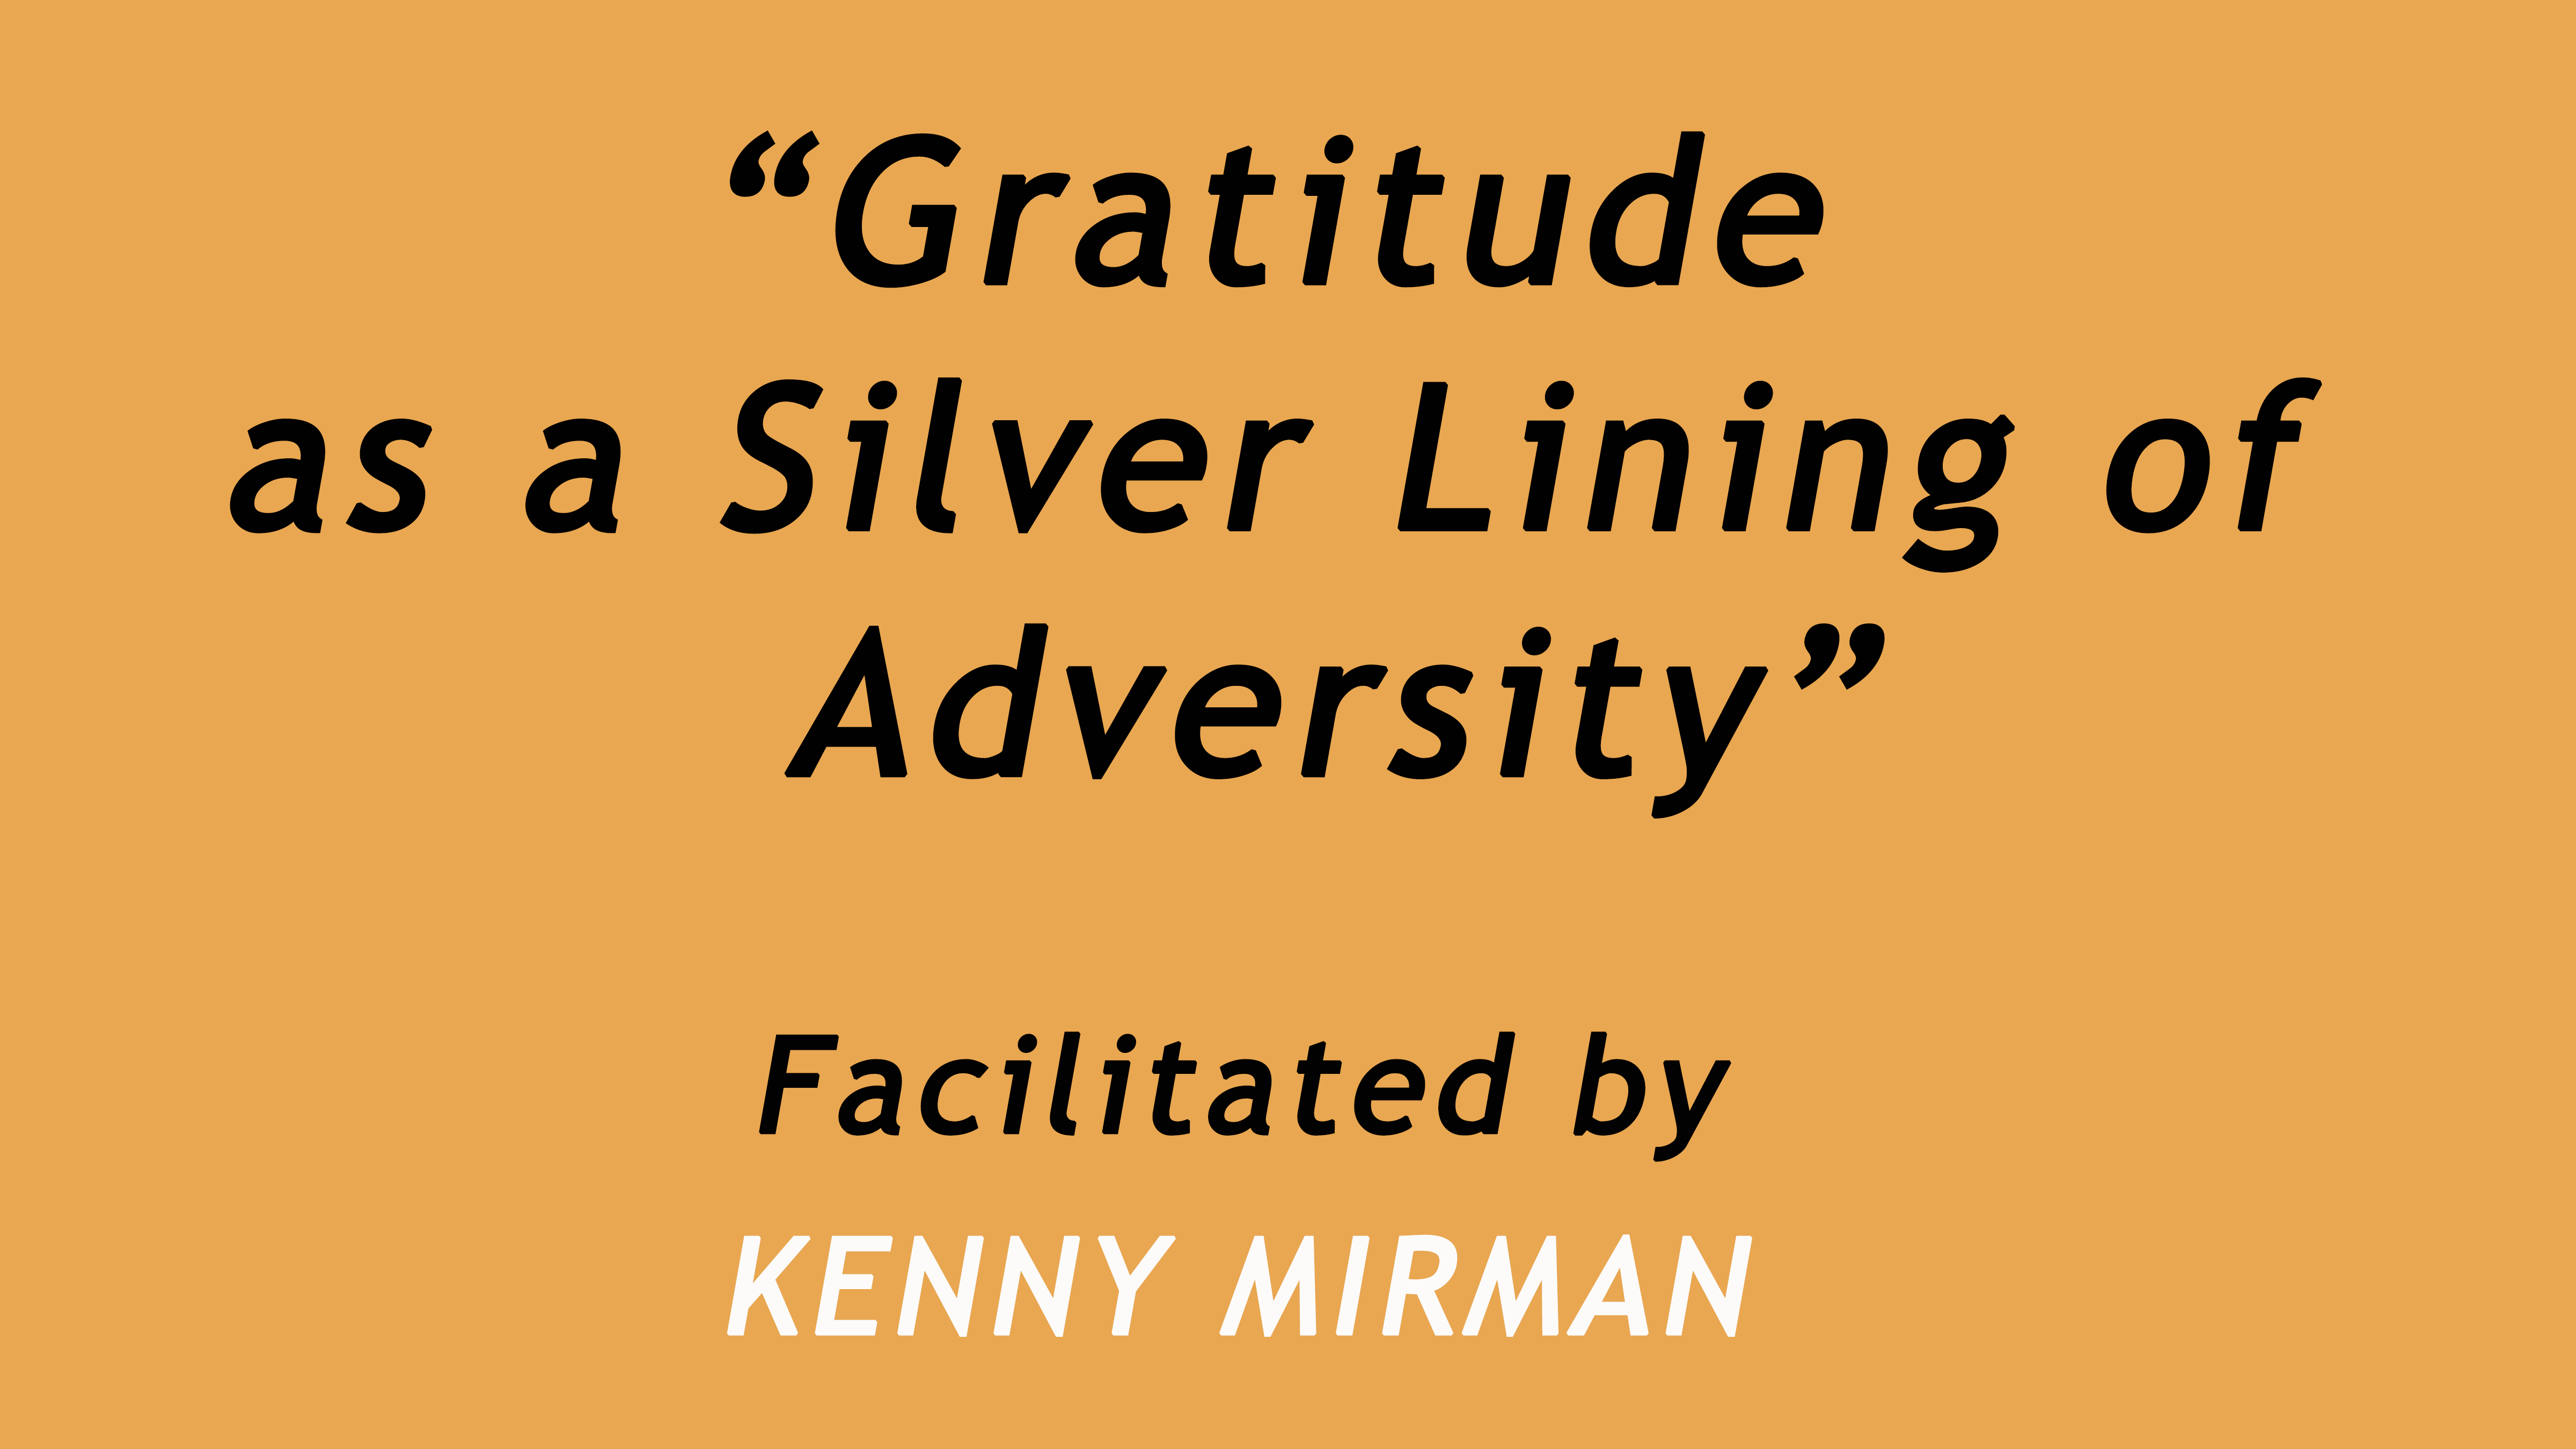 Gratitude as a Silver Lining of Adversity